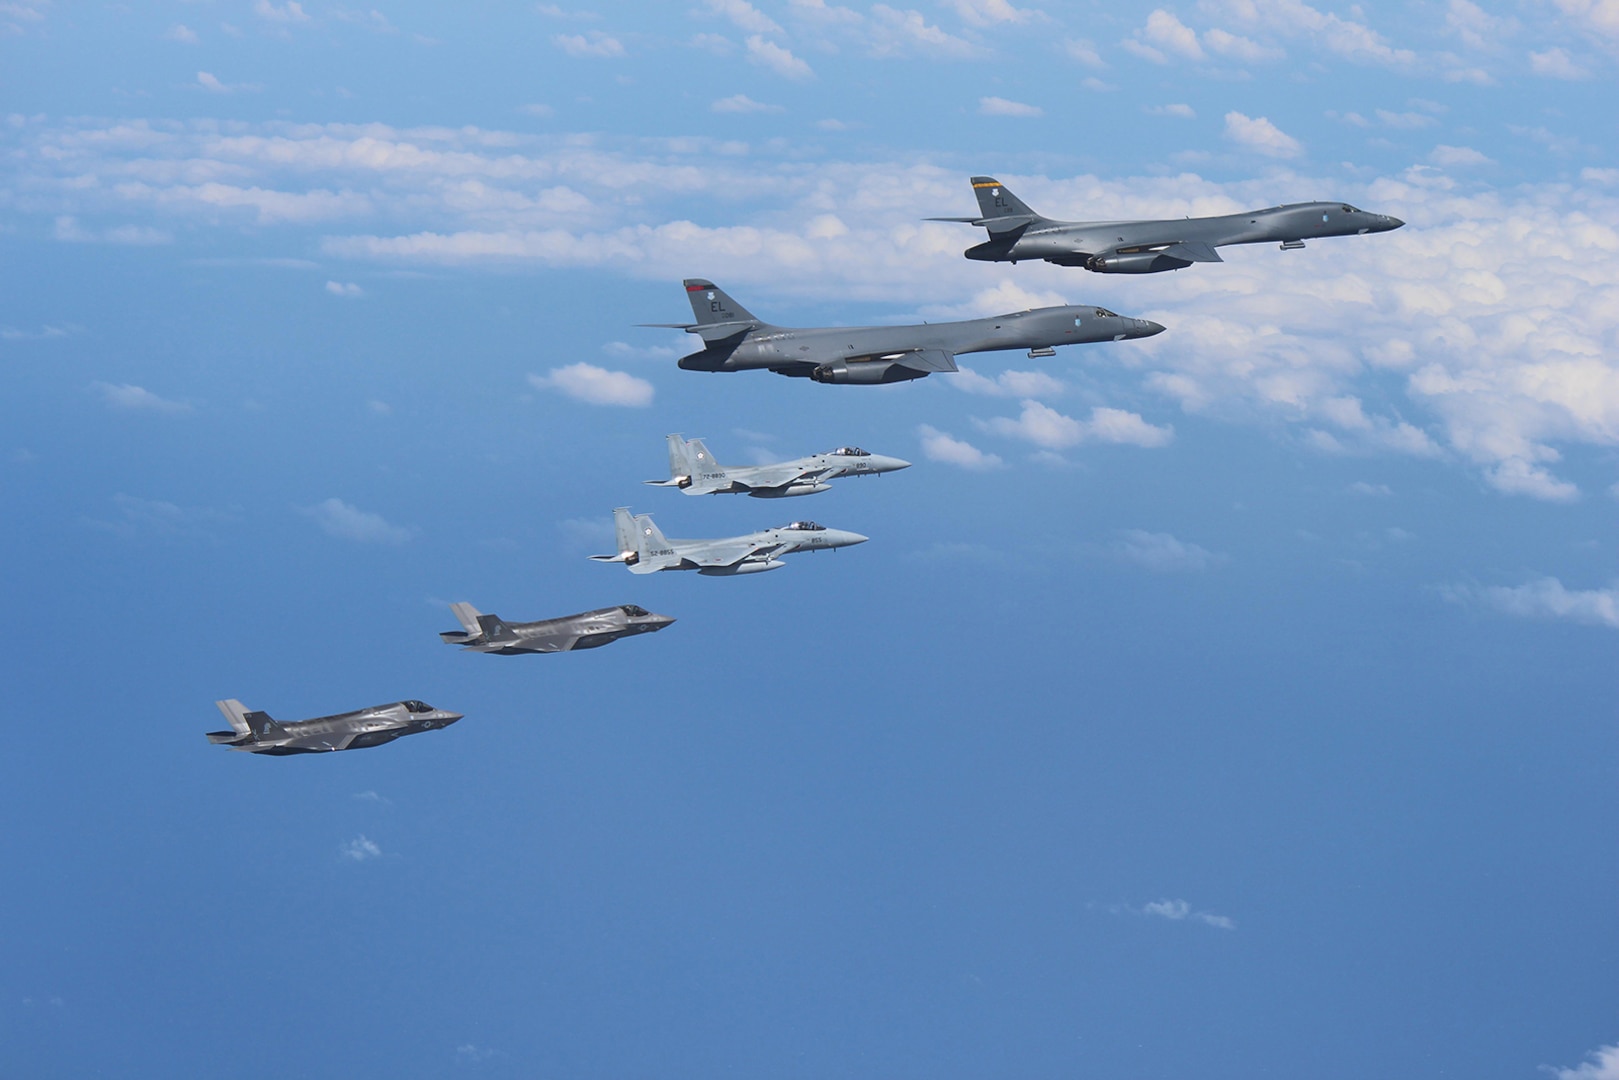 Marine F-35Bs and Air Force B-1Bs fly with JASDF F-15Js over Japanese airspace